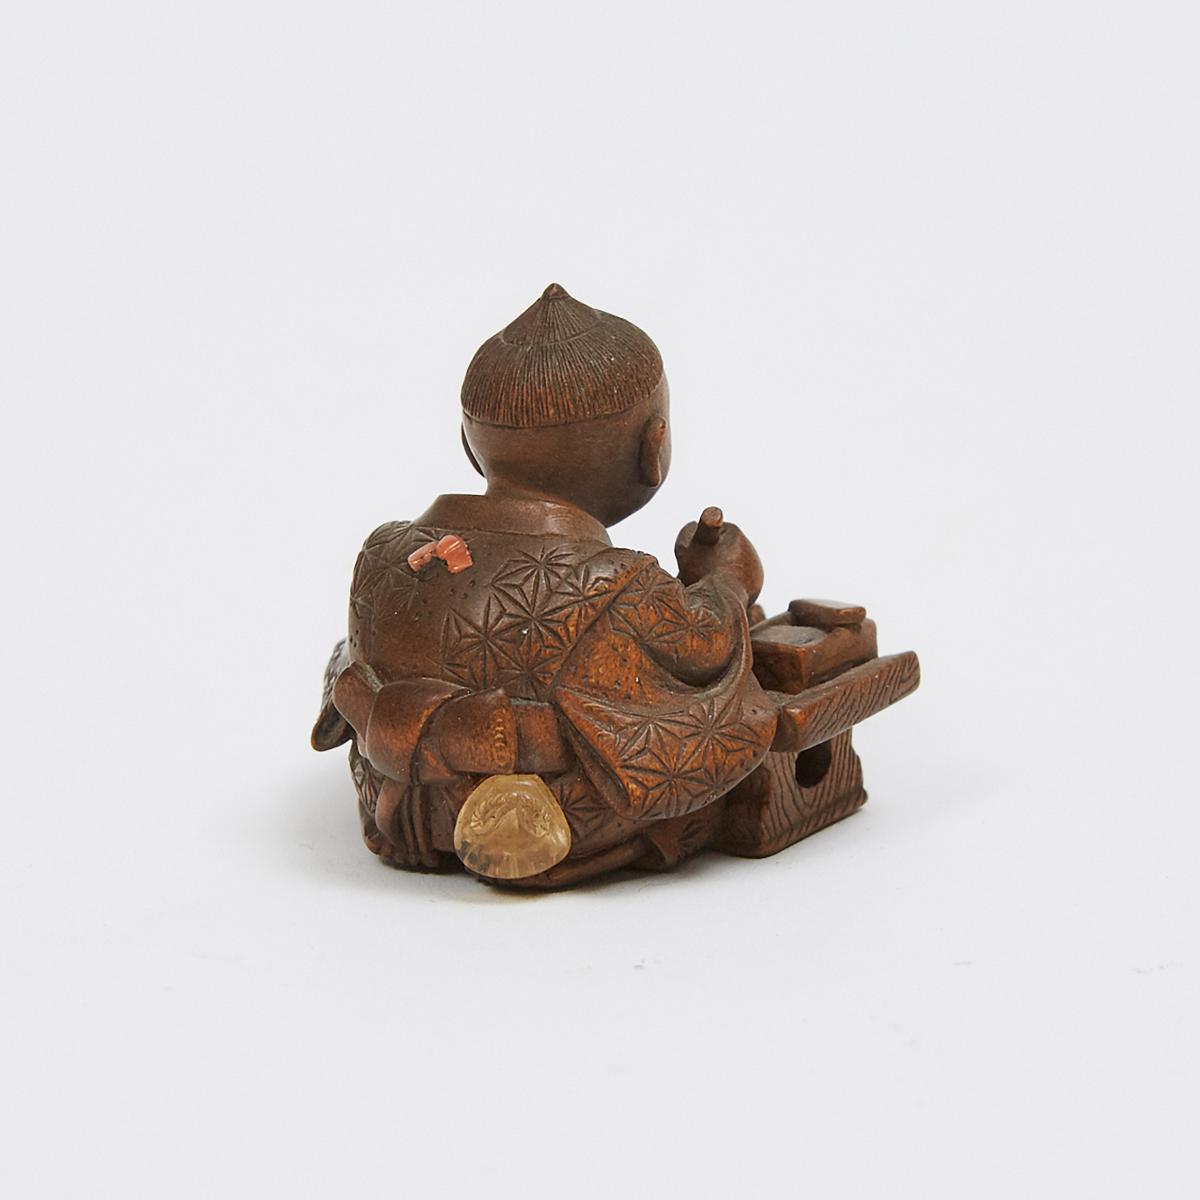 A Fine Wood Netsuke of a Boy, Signed Gyokuso, Early 20th Century, 1.3 x 1.3 x 1.1 in — 3.2 x 3.2 x 2 - Image 3 of 4